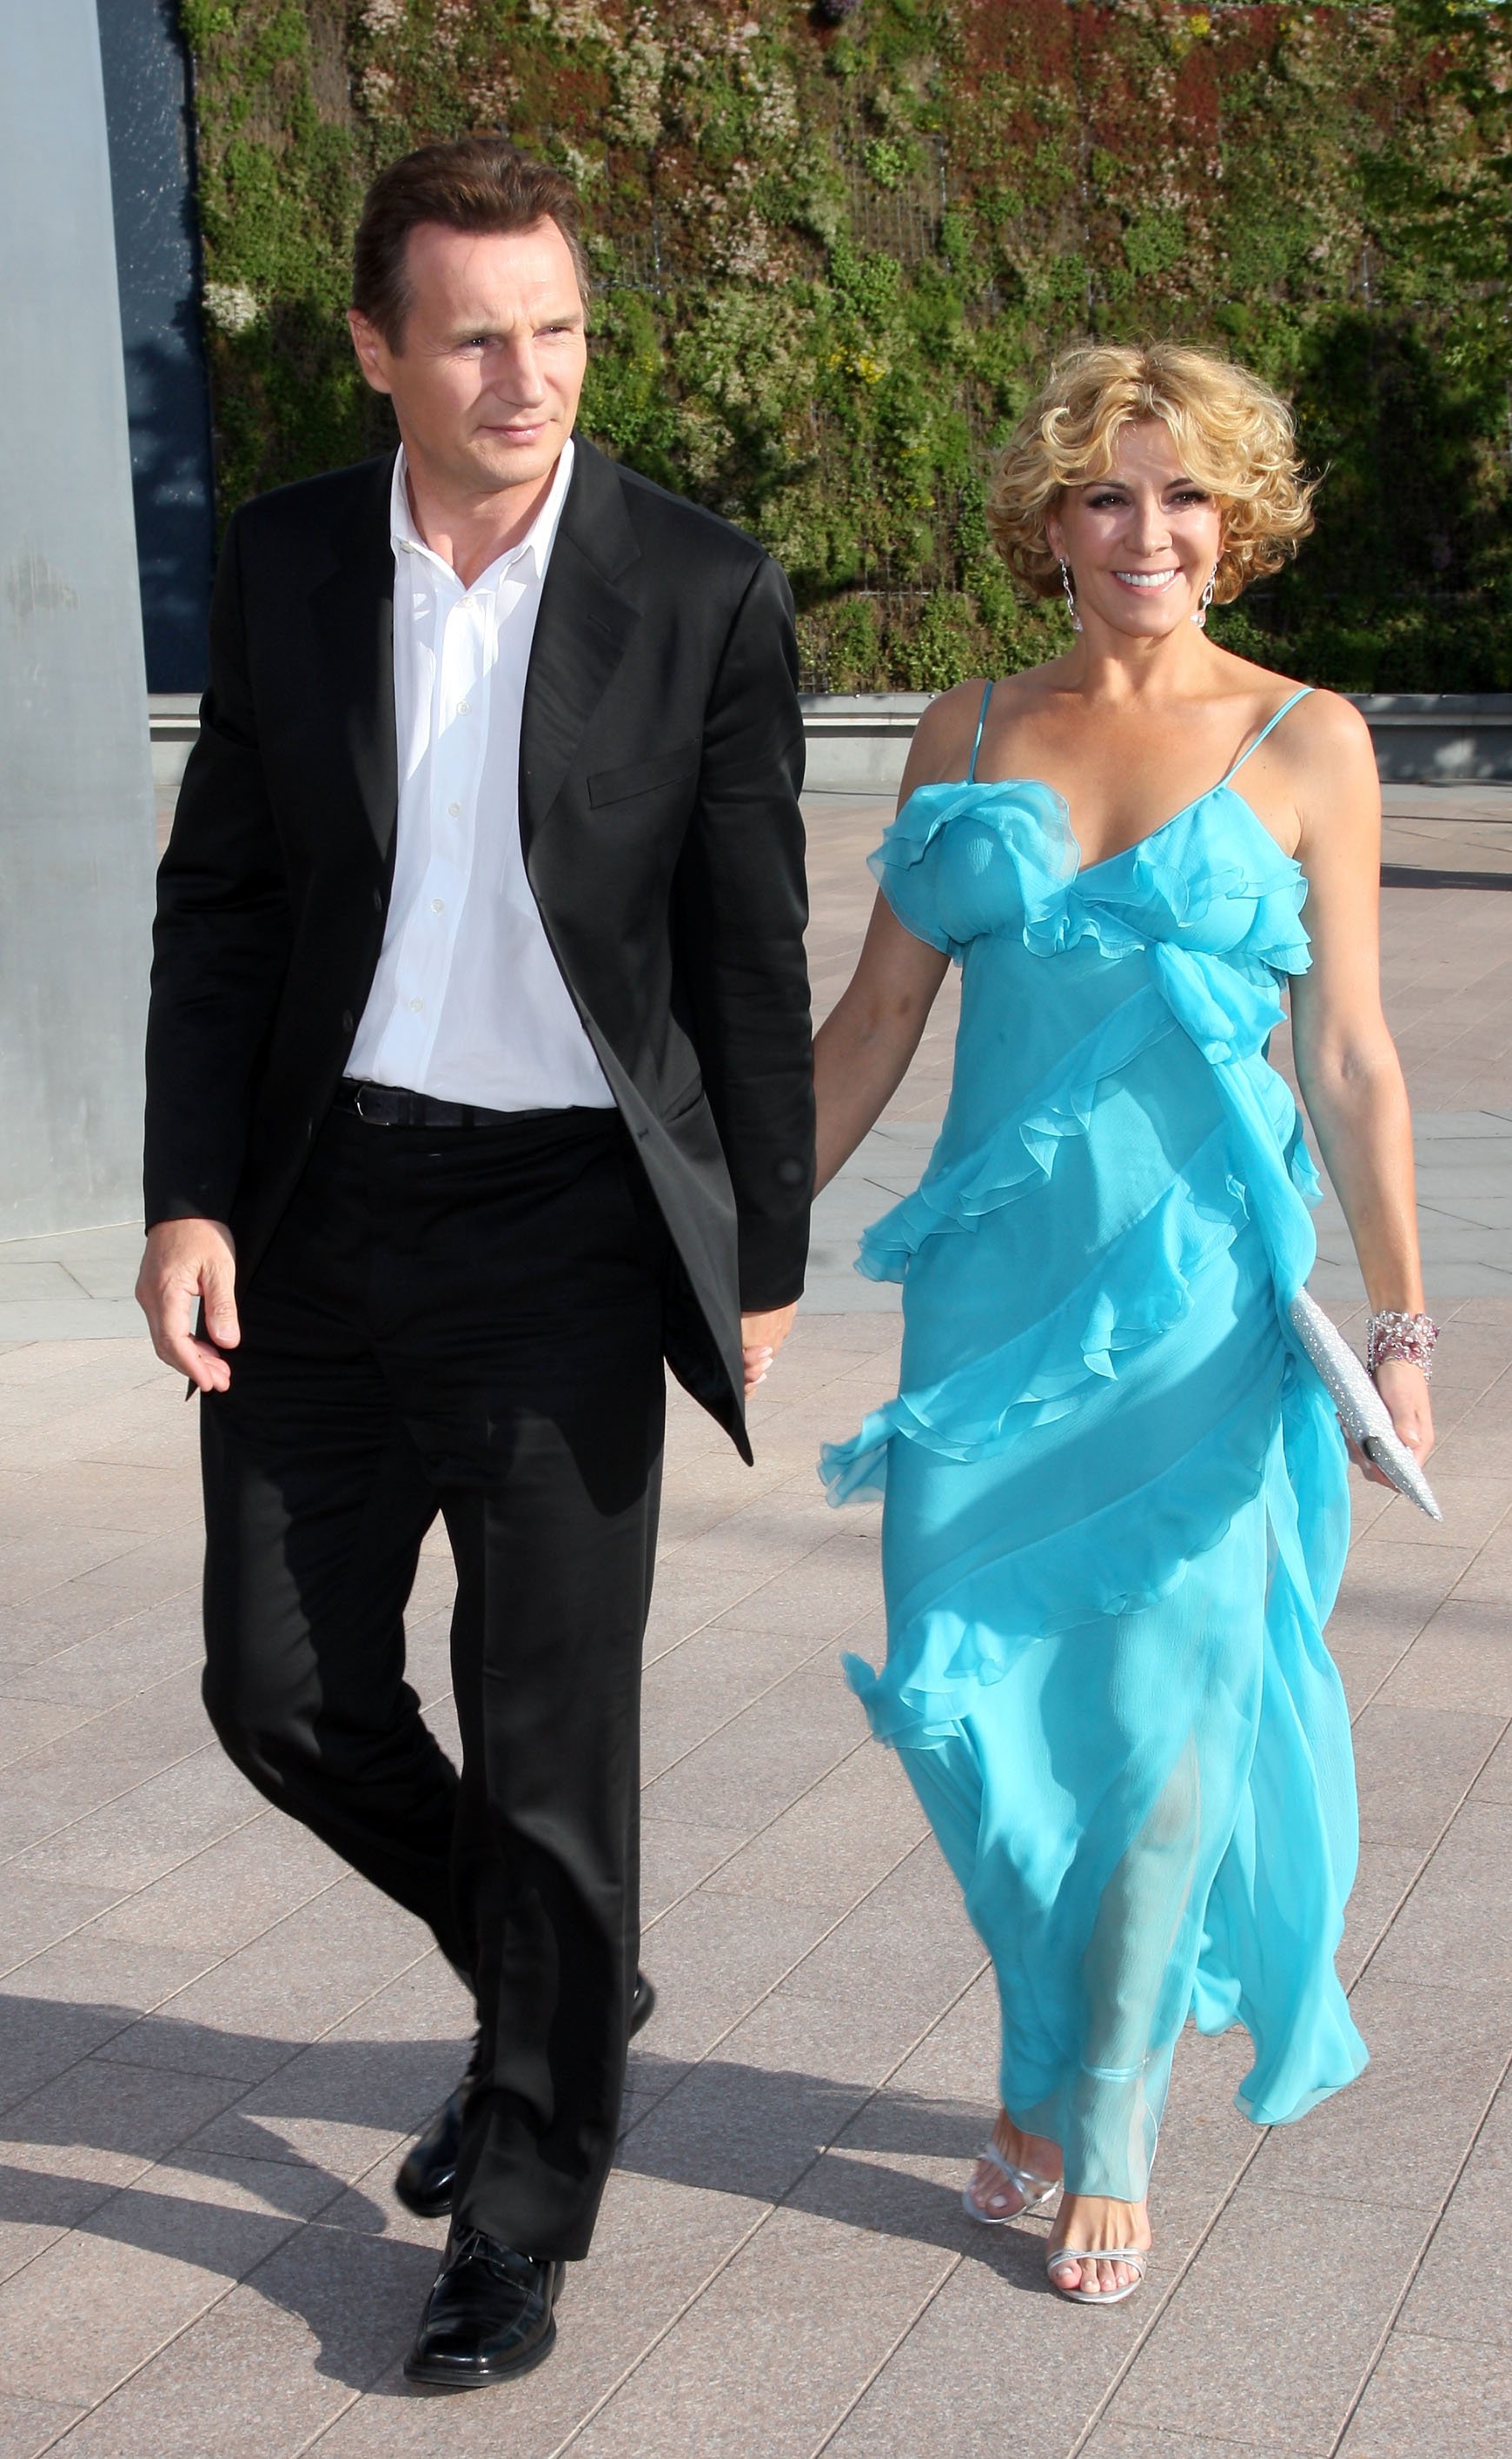 Actor Liam Neeson and Natasha Richardson at the UK Premiere of The Chronicles of Narnia - Prince Caspian at the O2 Dome in North Greenwich on June 19, 2008 in London, England. | Source: Getty Images